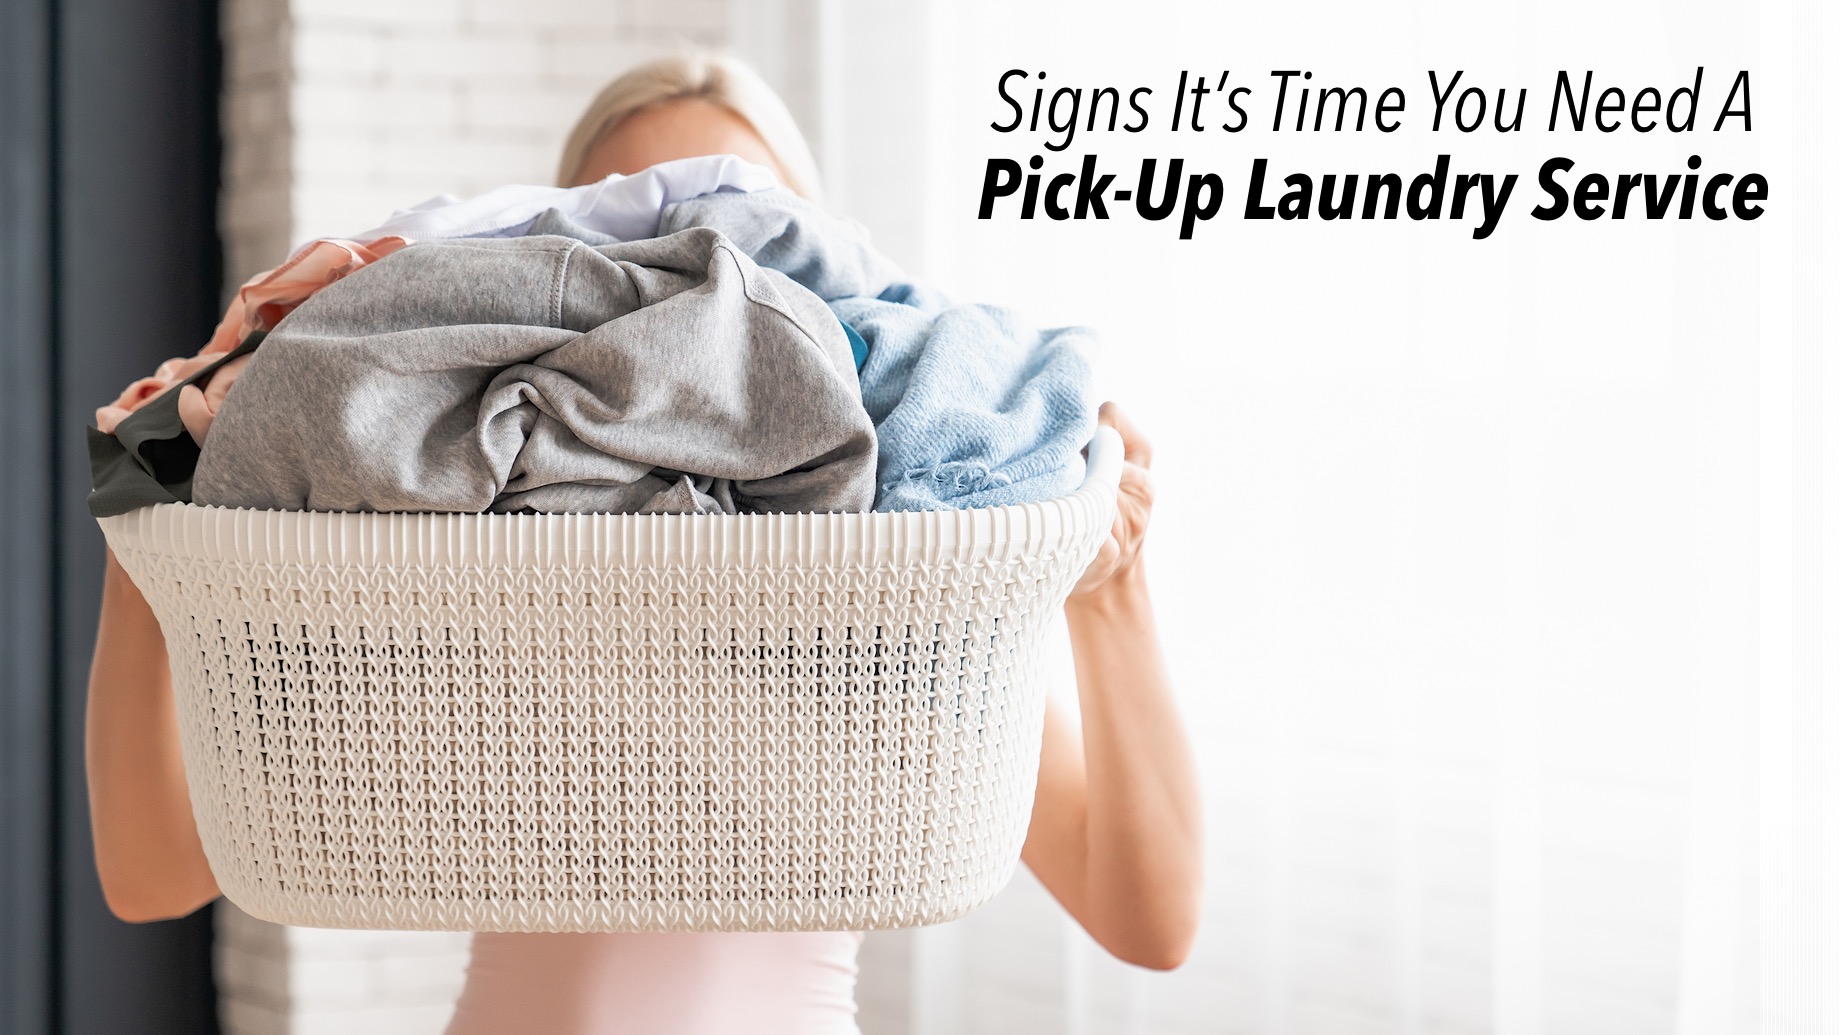 Signs It’s Time You Need A Pick-Up Laundry Service